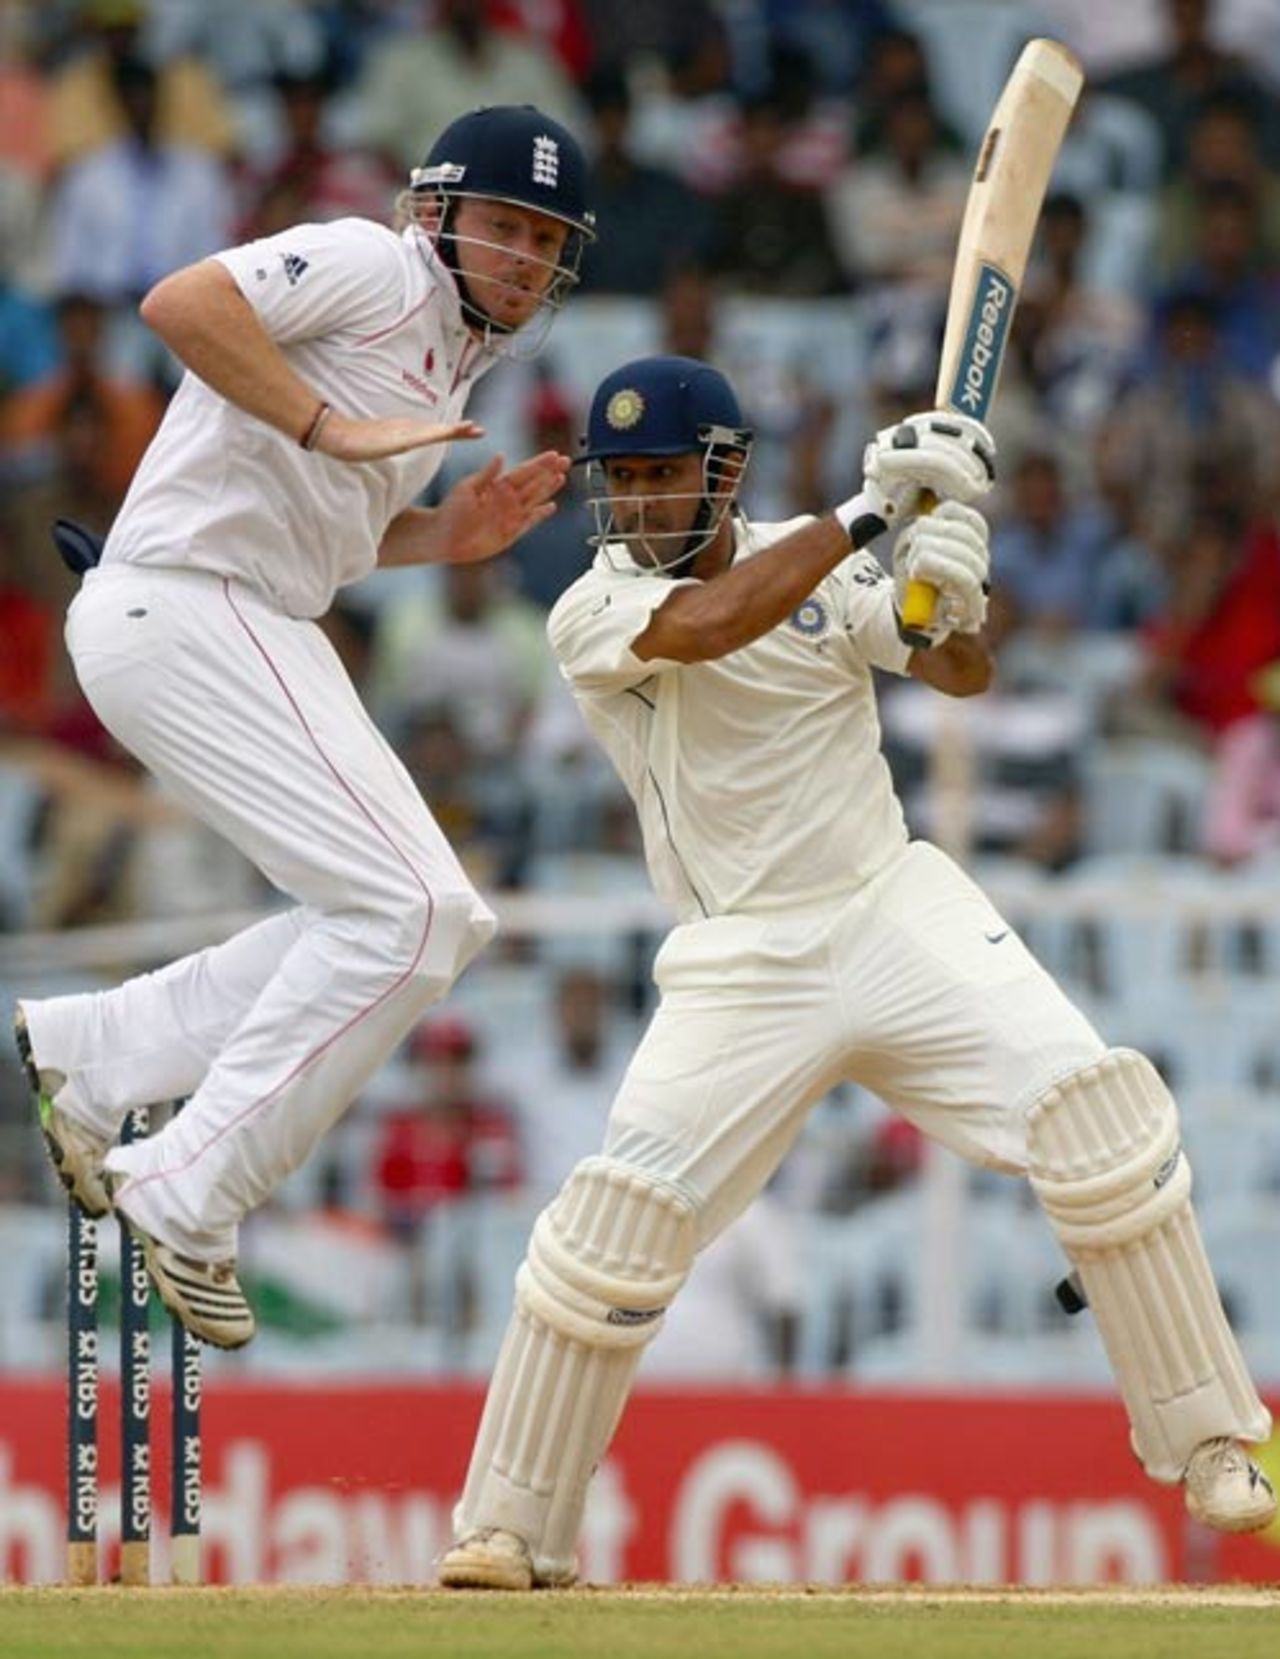 Ian Bell takes evasive action as Mahendra Singh Dhoni crunches the ball through the off side, India v England, 1st Test, Chennai, 3rd day, December 13, 2008